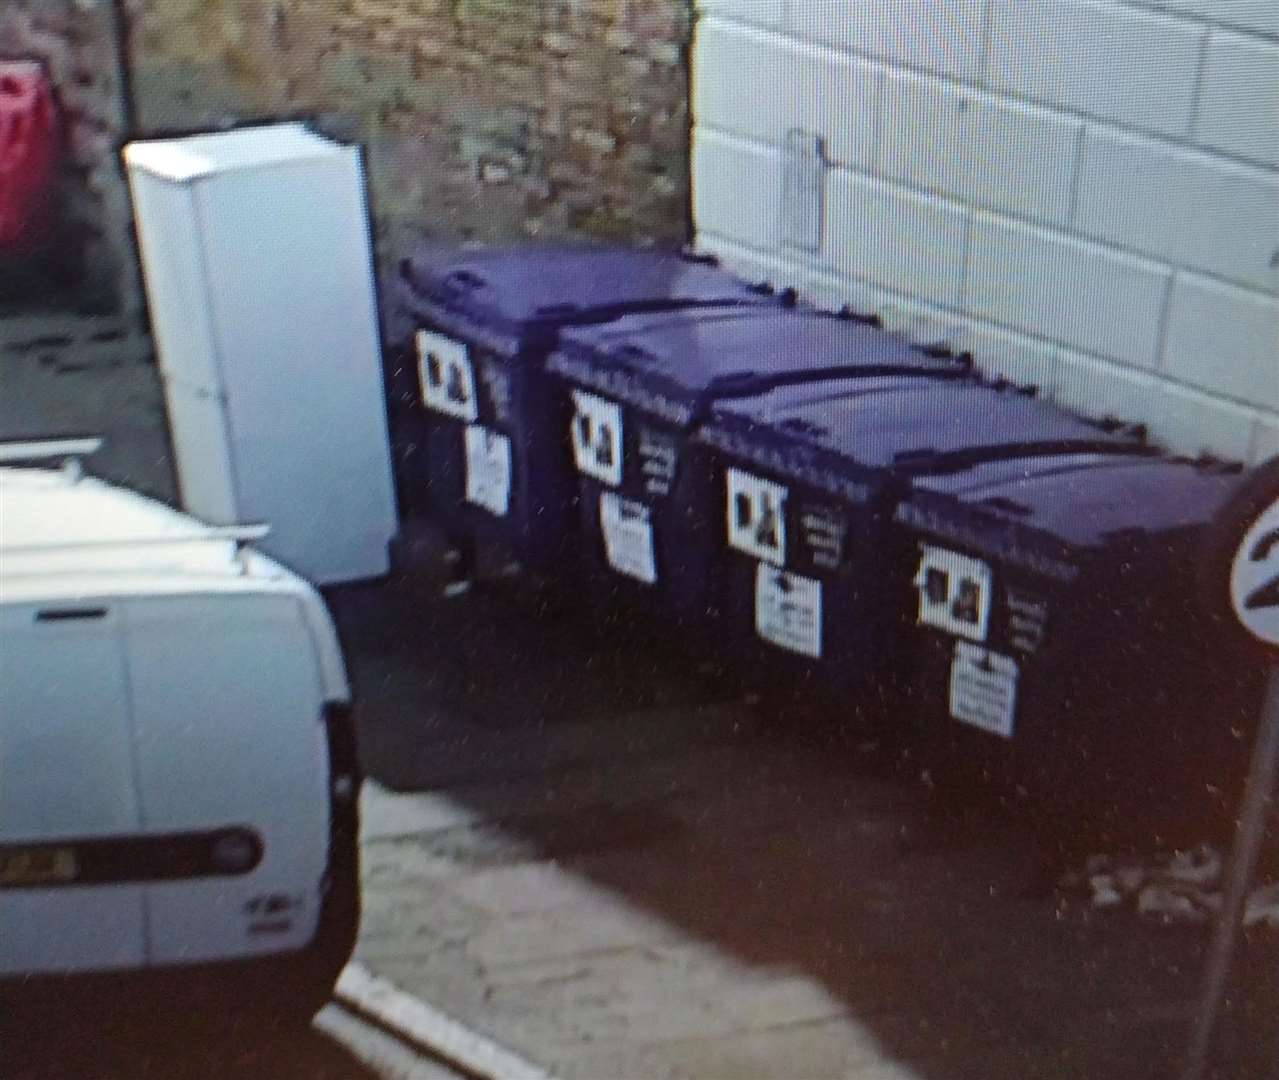 The dumped fridge was caught on CCTV in Athelstan Road, Margate. Picture: TDC